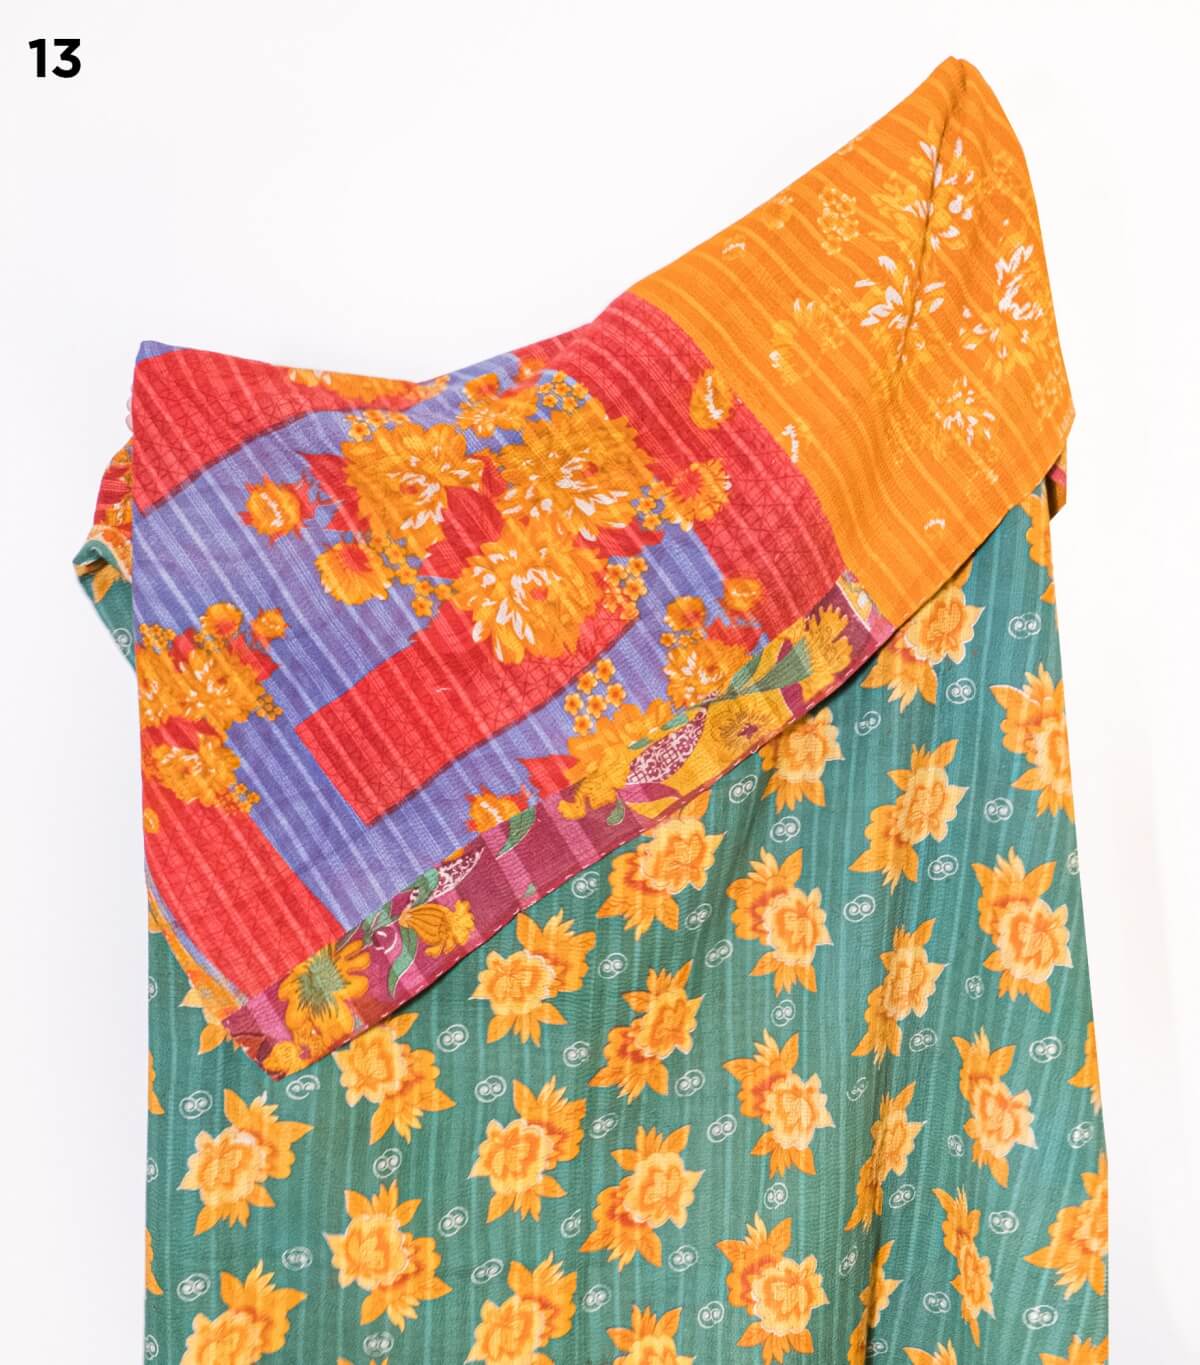 Indian Kantha cotton - 92x69 inches